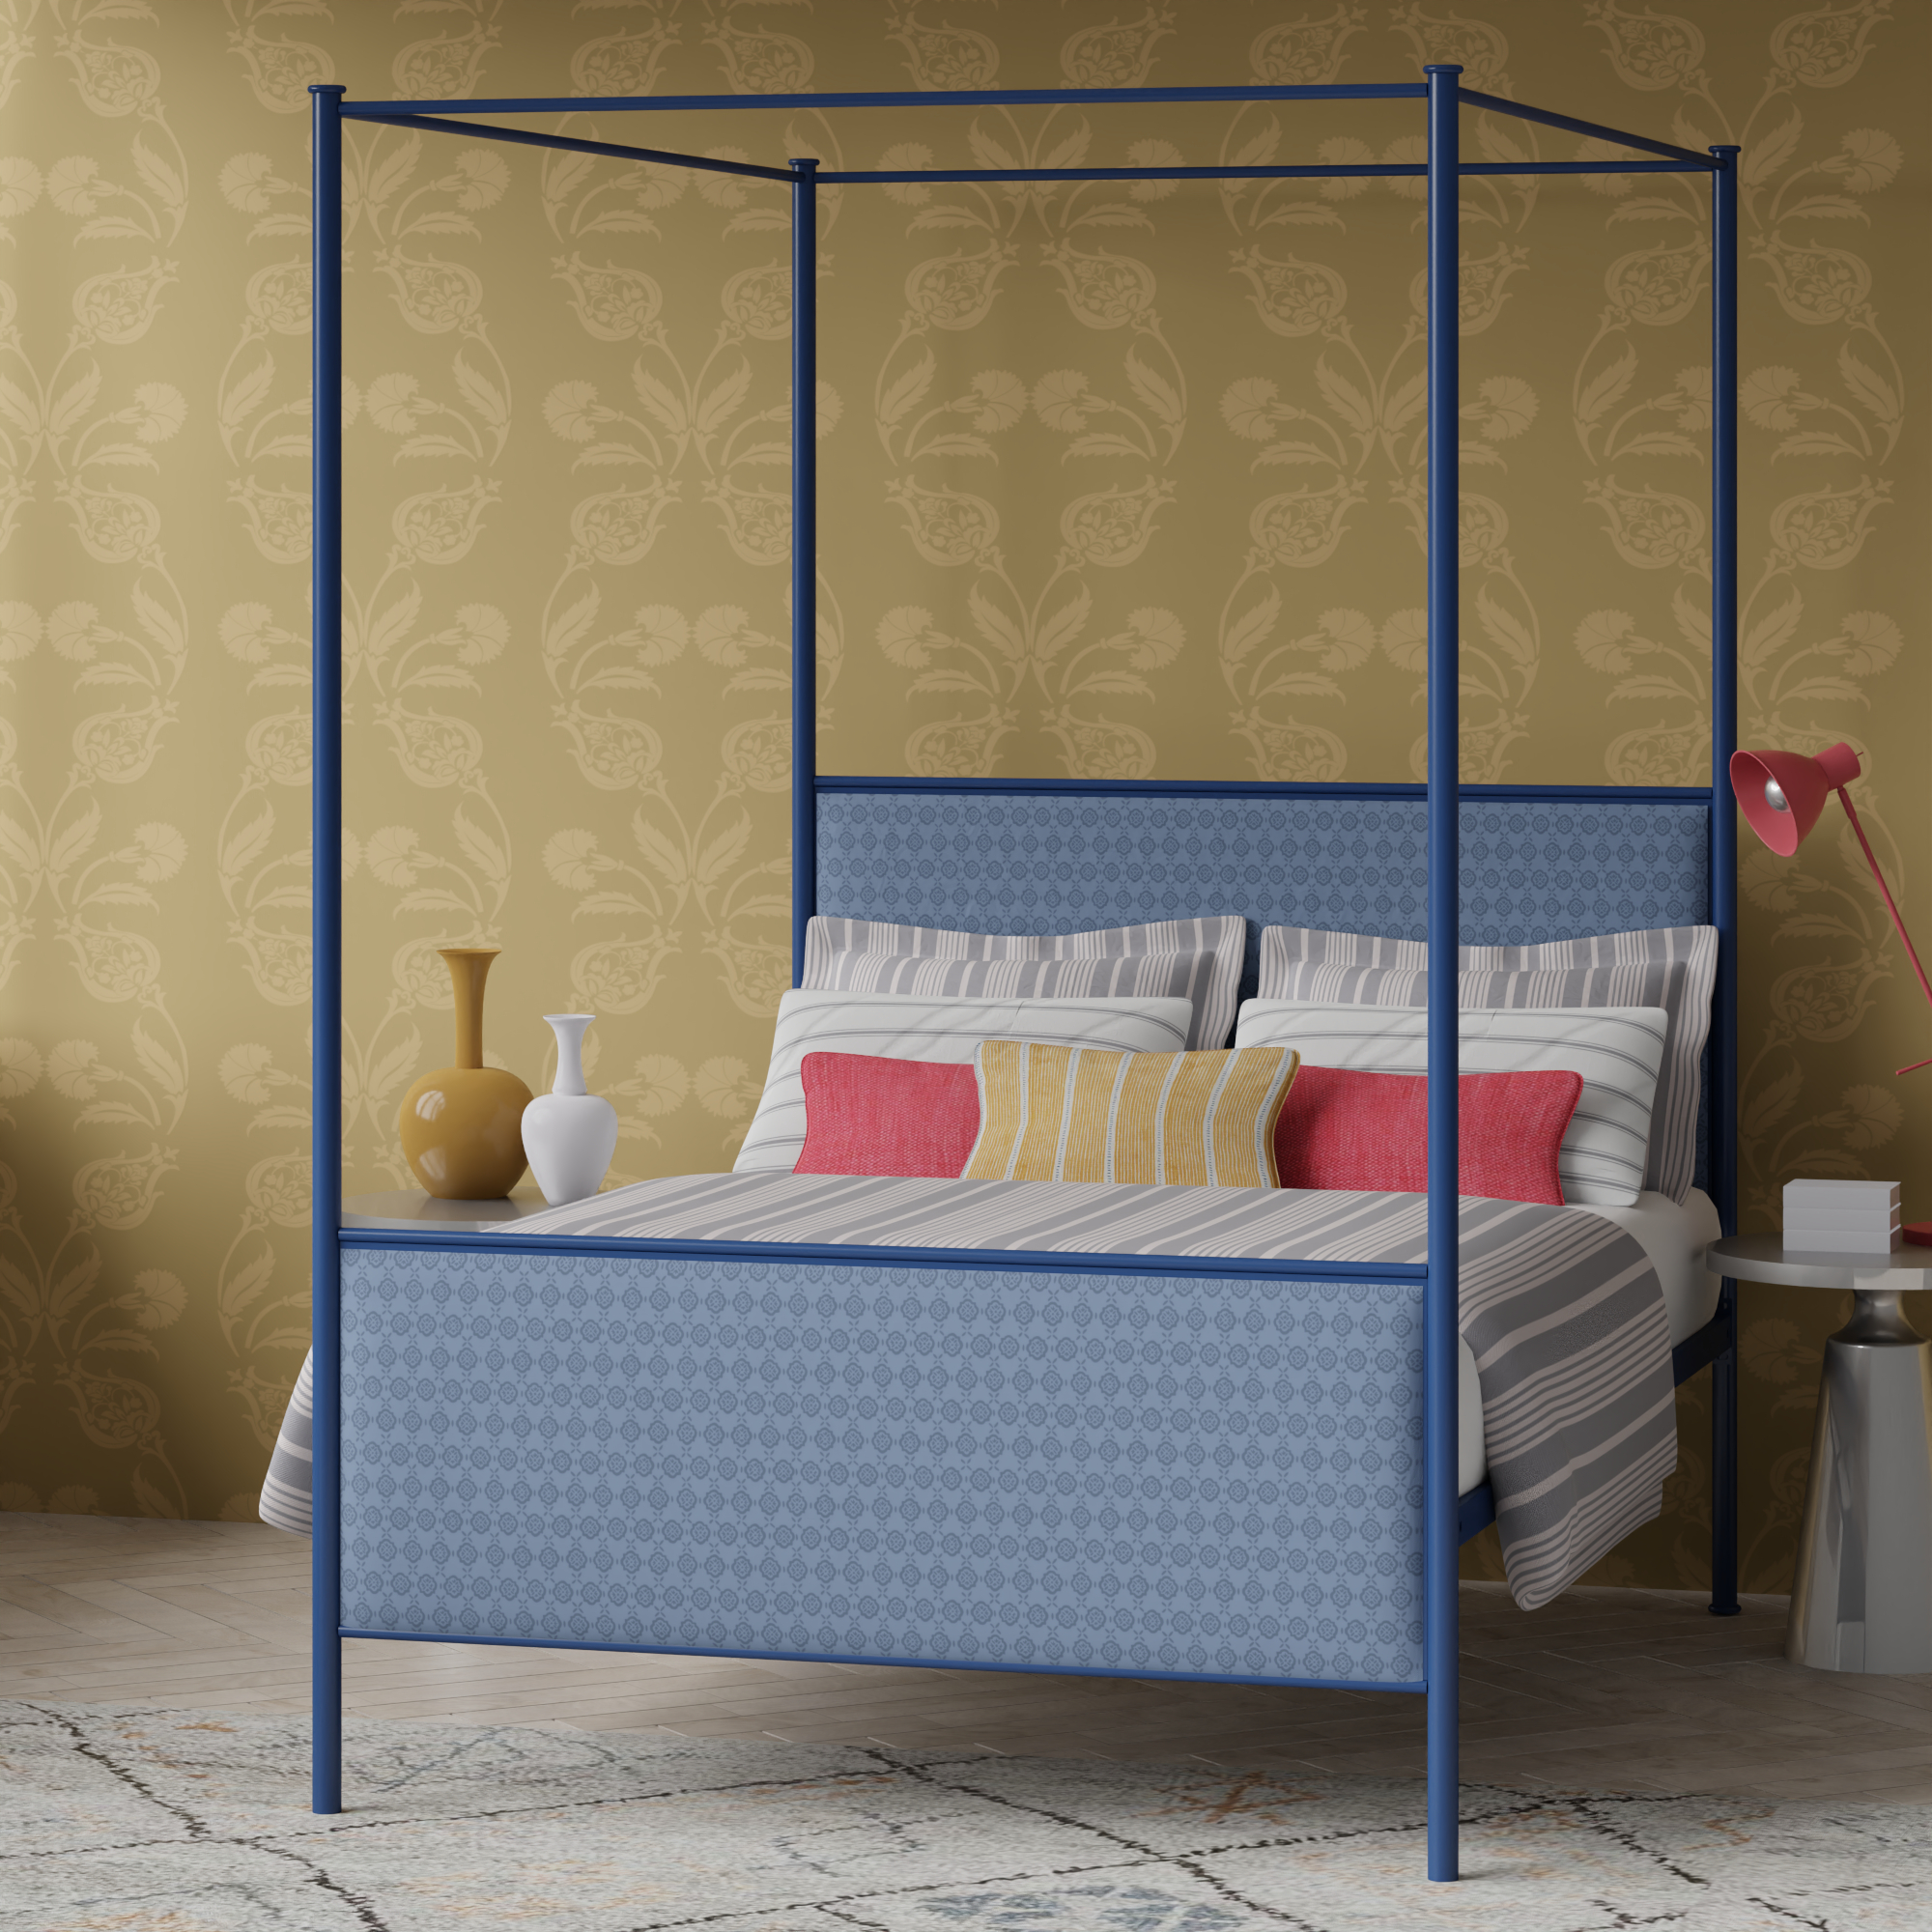 Reims metal bed - Image blue yellow 2